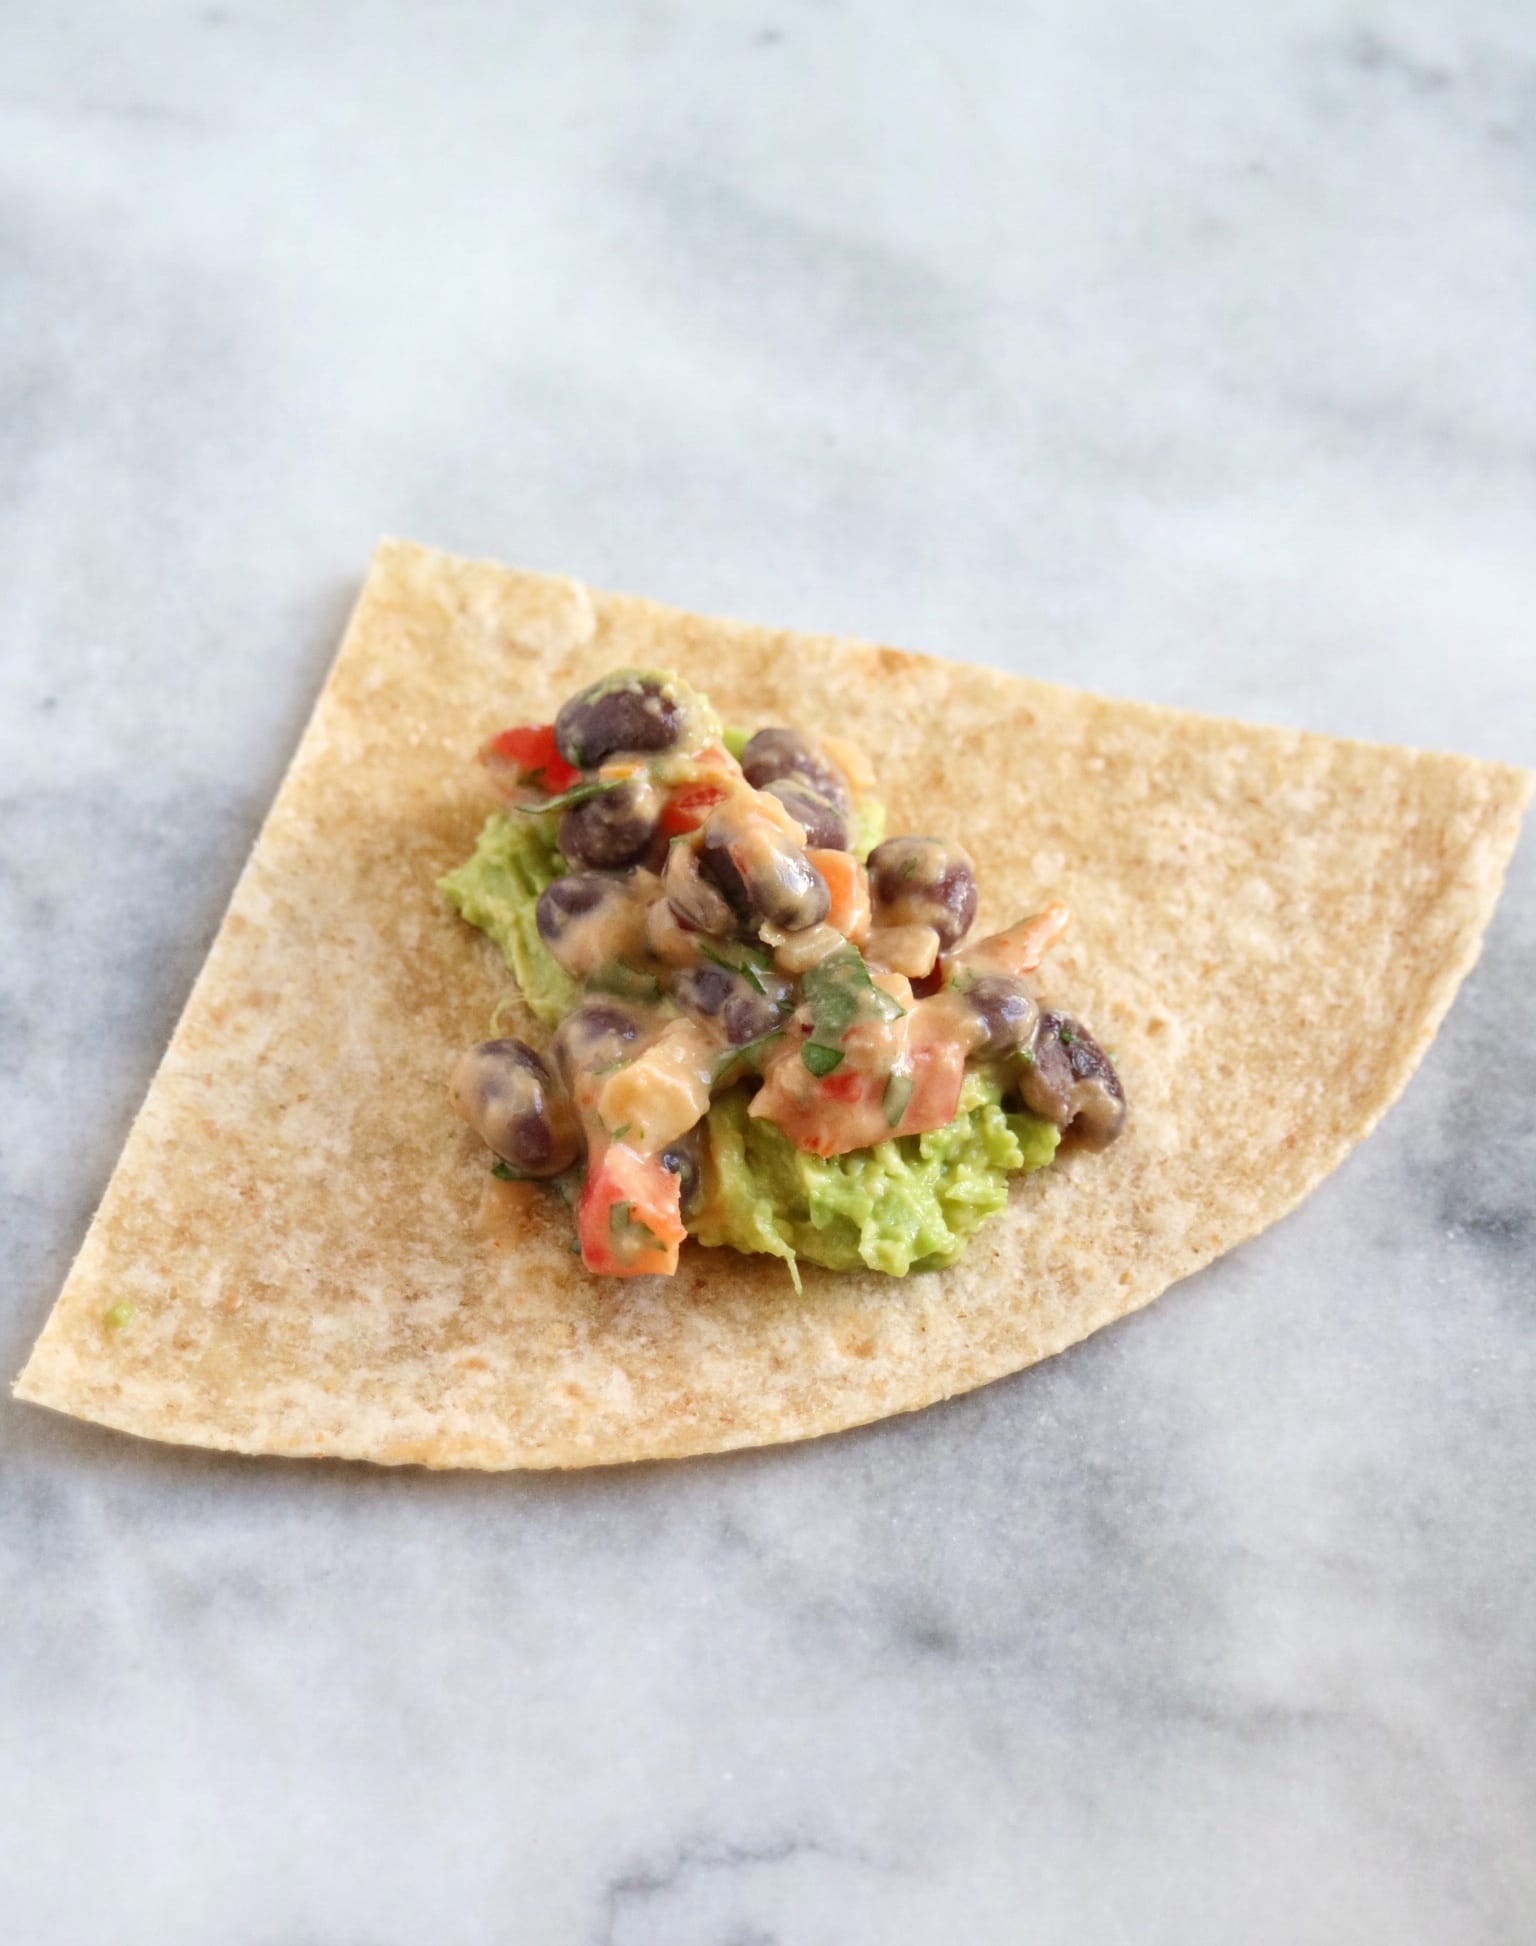 tortilla quarter with mashed avocado and bean filling on top | The Nutrition Adventure